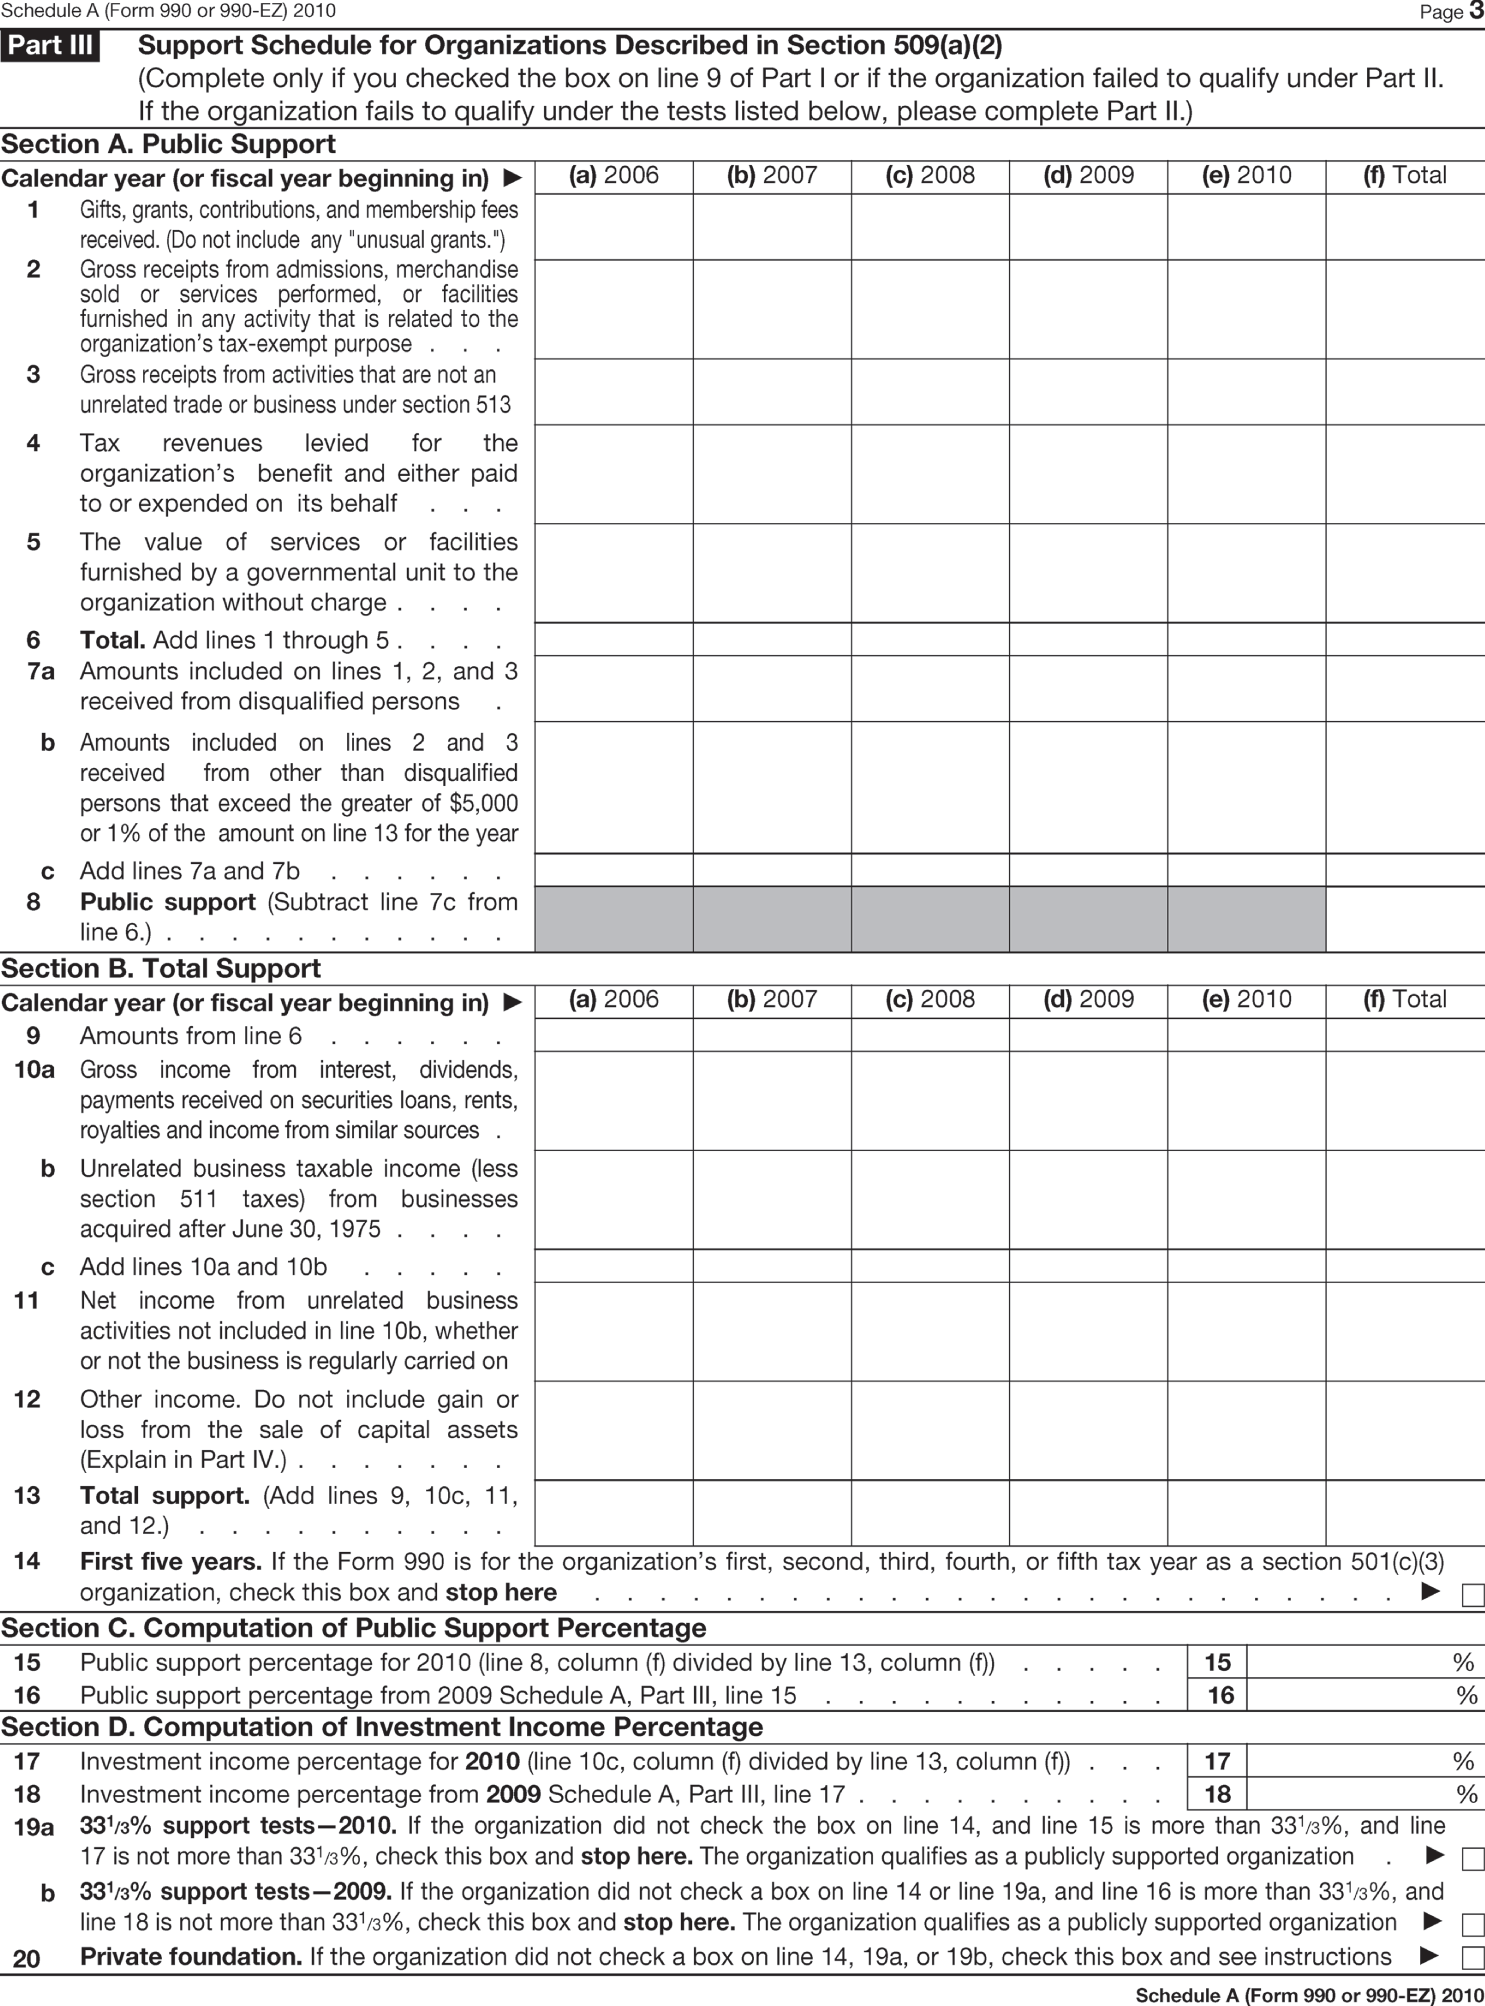 Illustration of Form 990 Schedule A presenting the rules and regulations of “Public Charity Status and Public Support” - Part III.